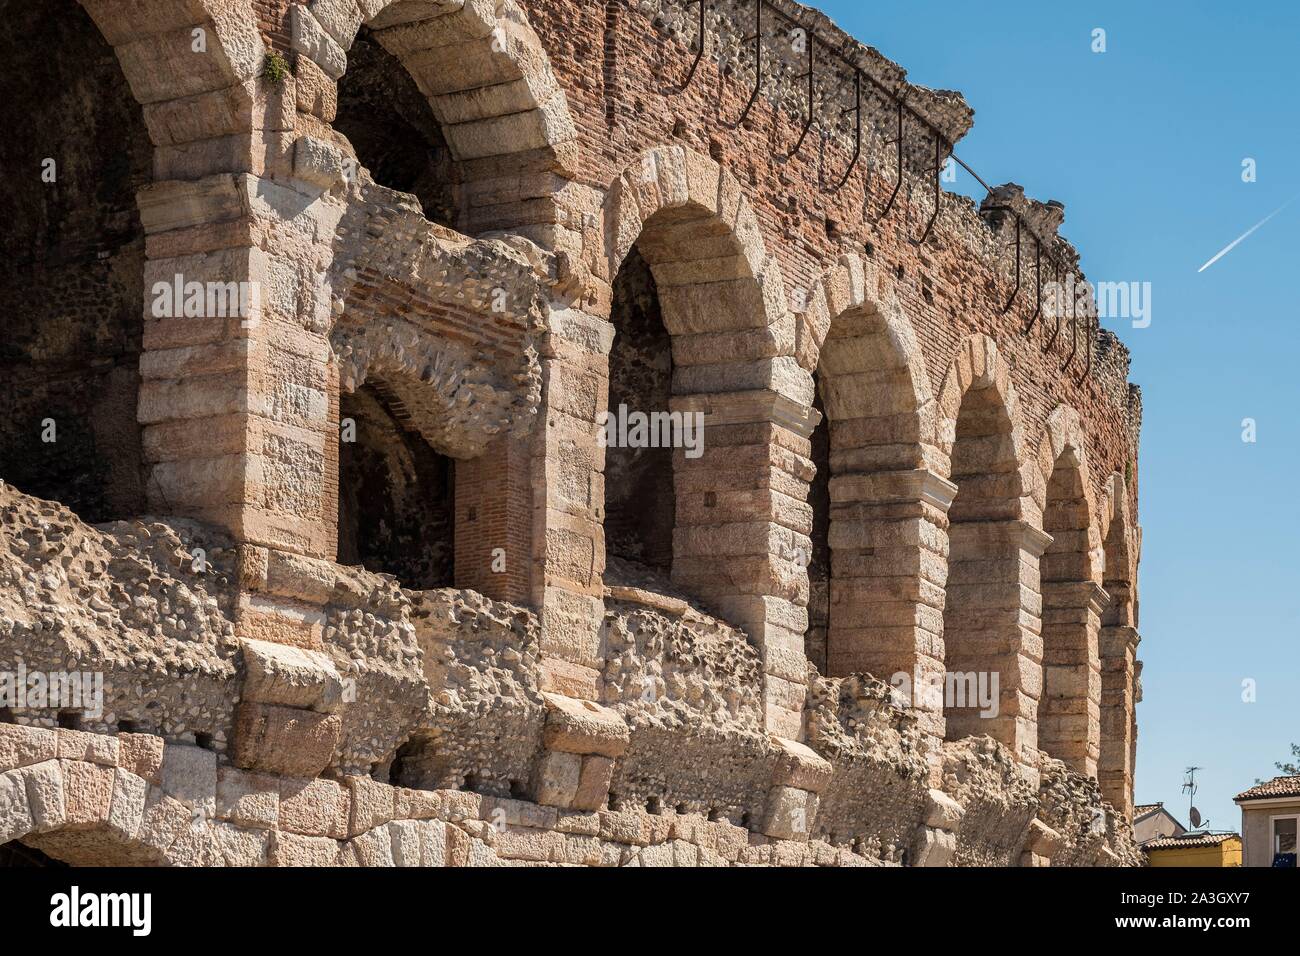 Italy, Veneto, Verona, listed as World Heritage by UNESCO, the Arena of Verona on Bra Square, ancient Roman amphitheater built in 30 after J-C Stock Photo